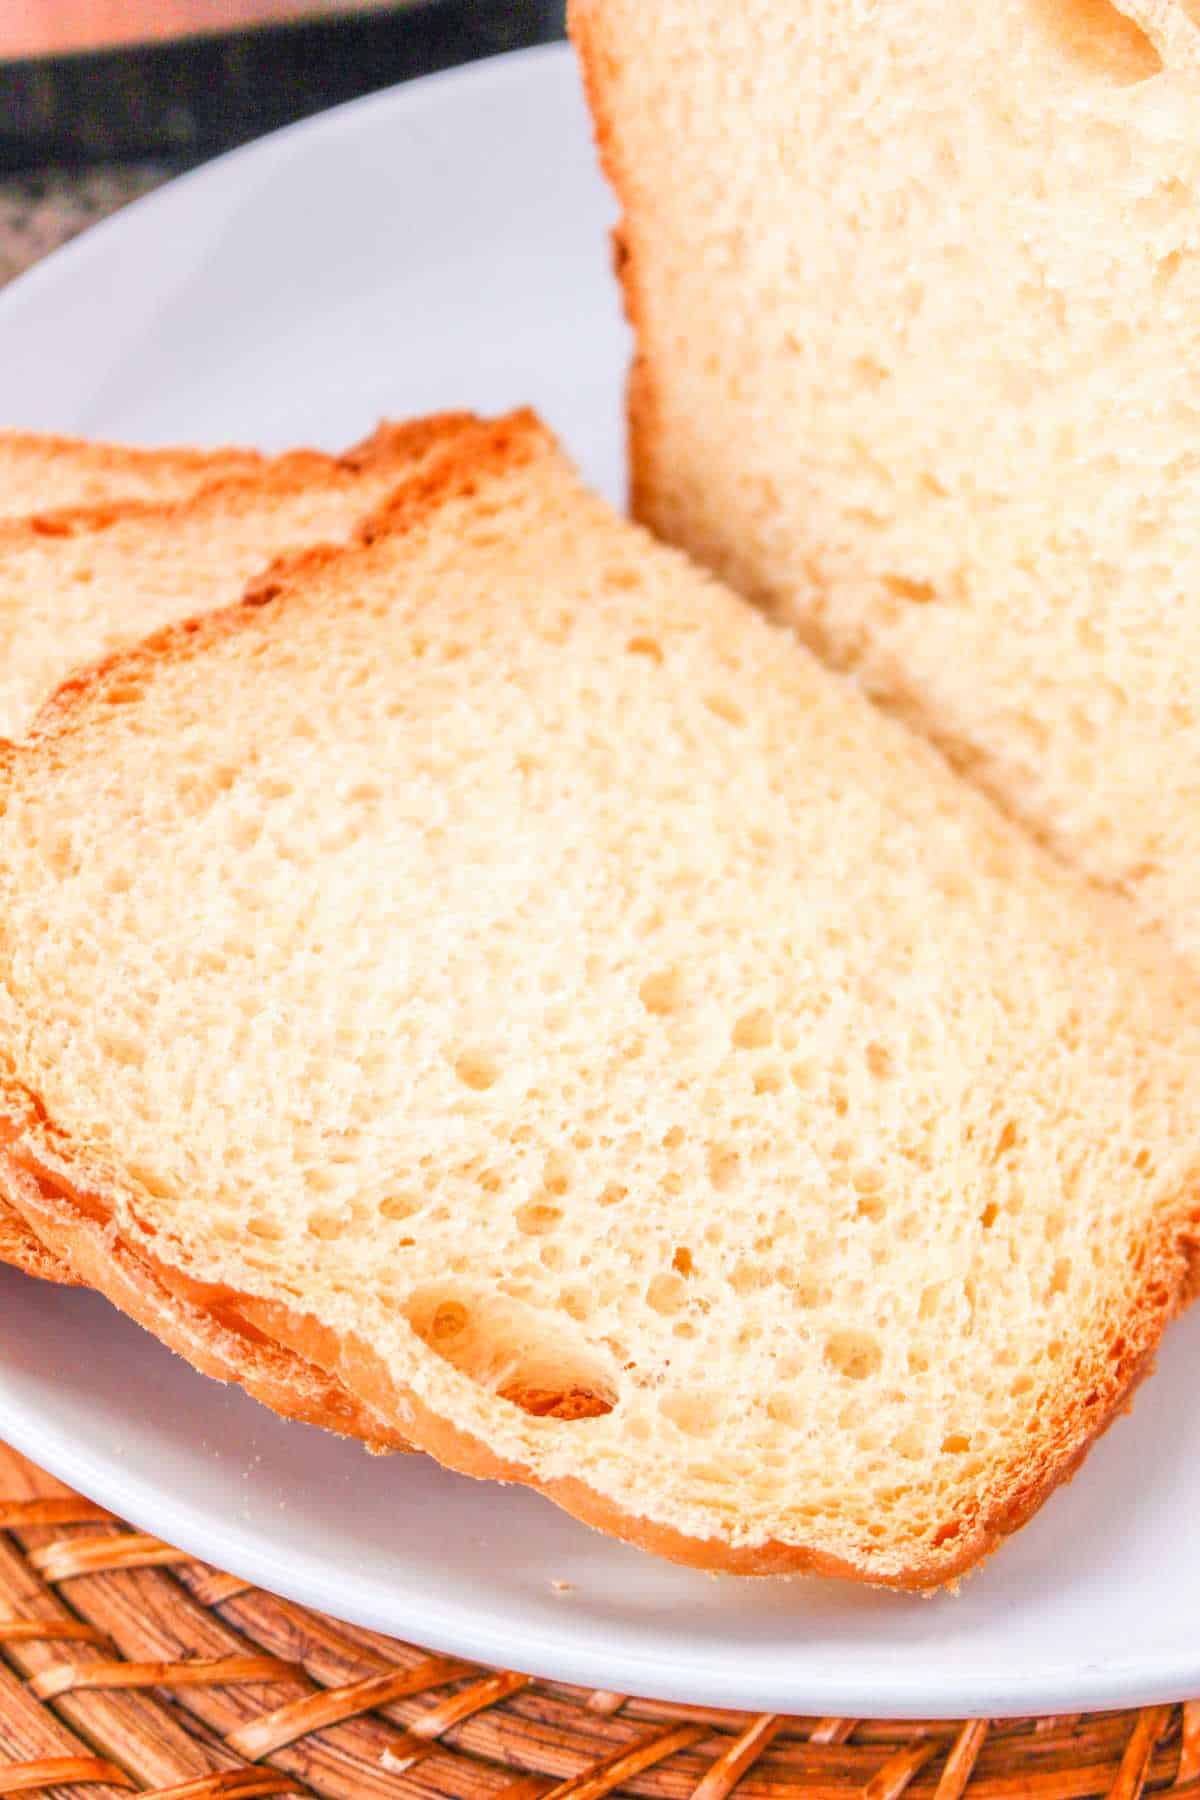 Sliced bread on a plate, perfect for sandwiches.